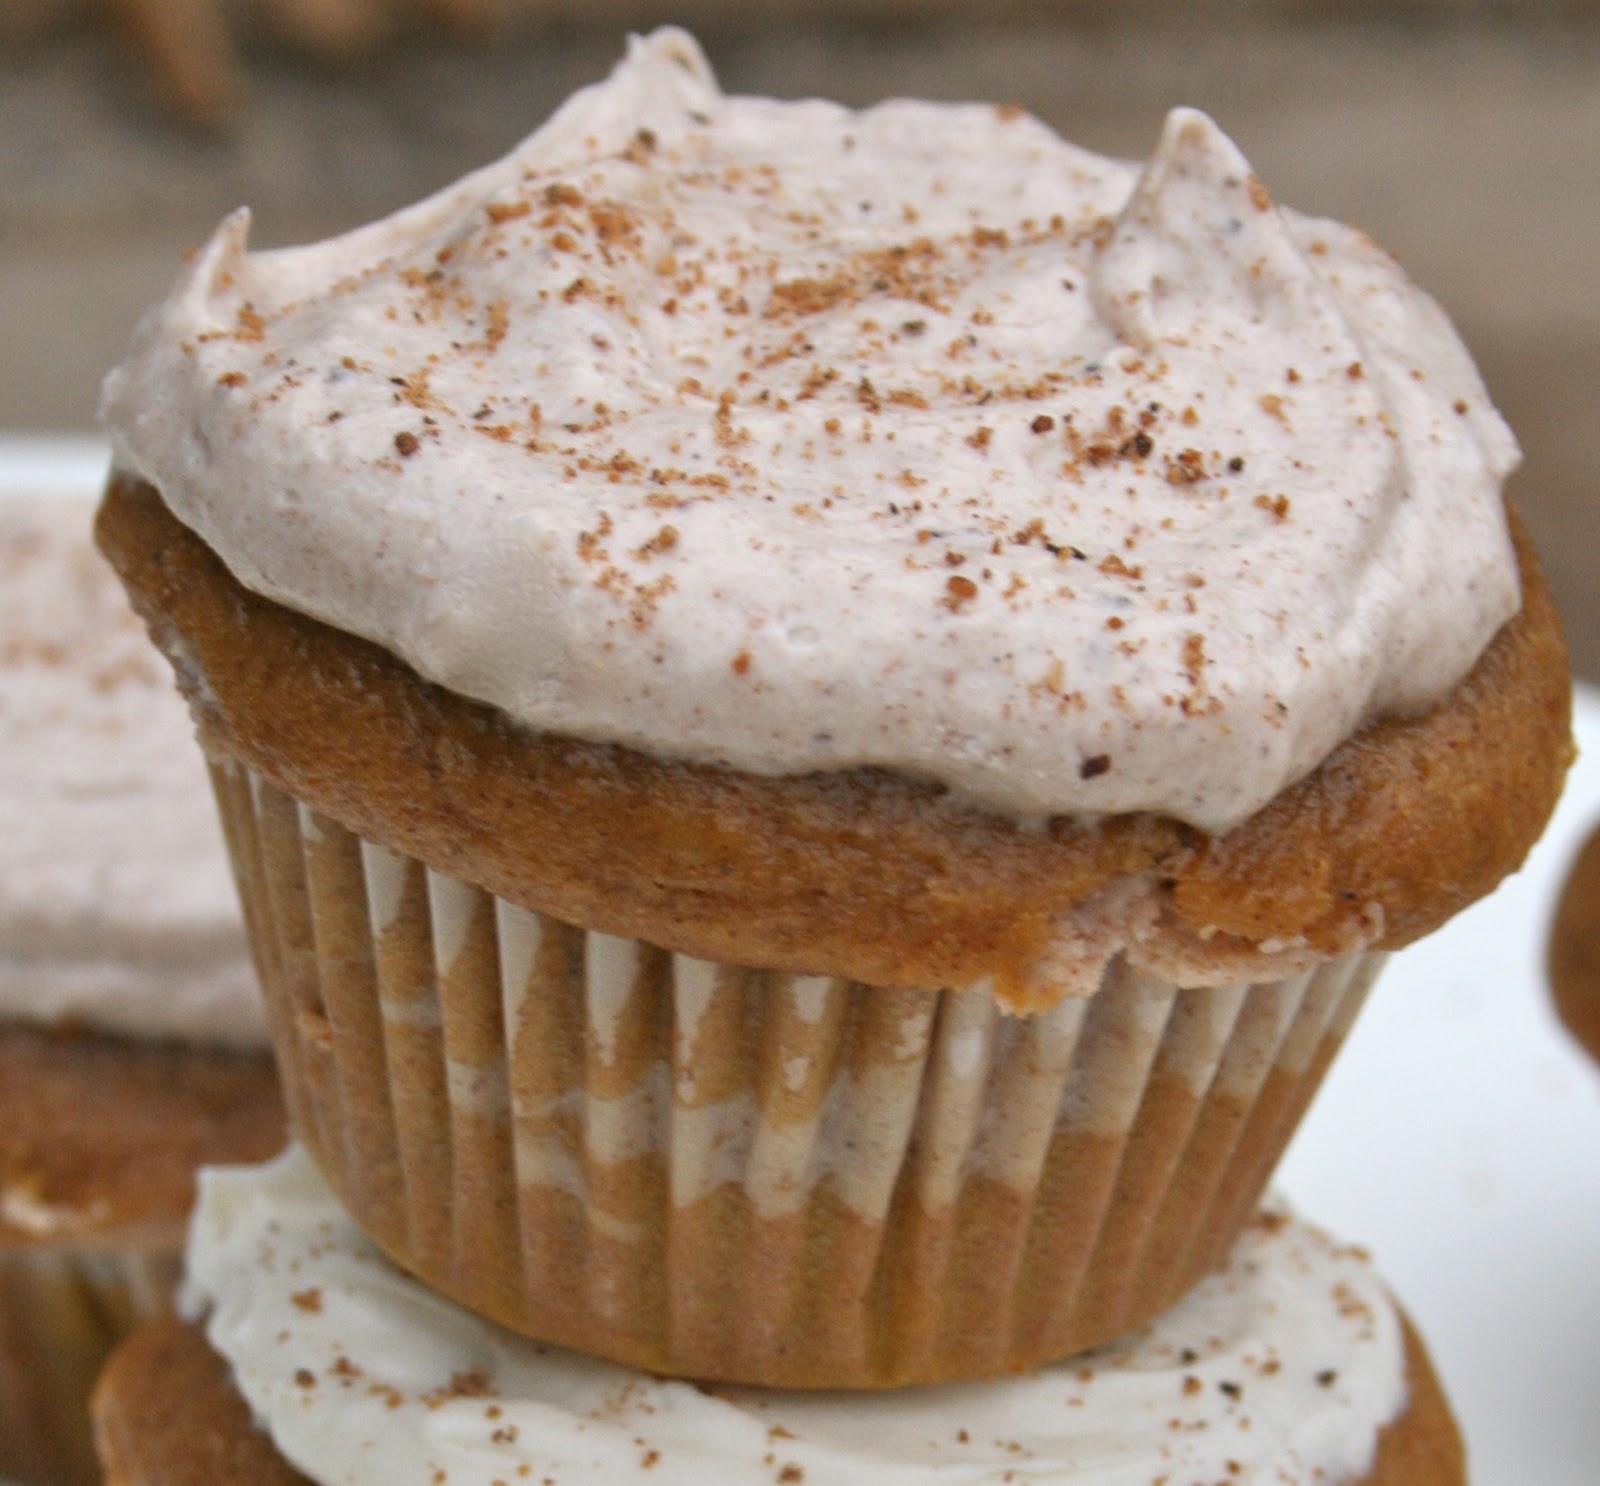 Photos of Pumpkin Cupcakes with Cheesecake Filling